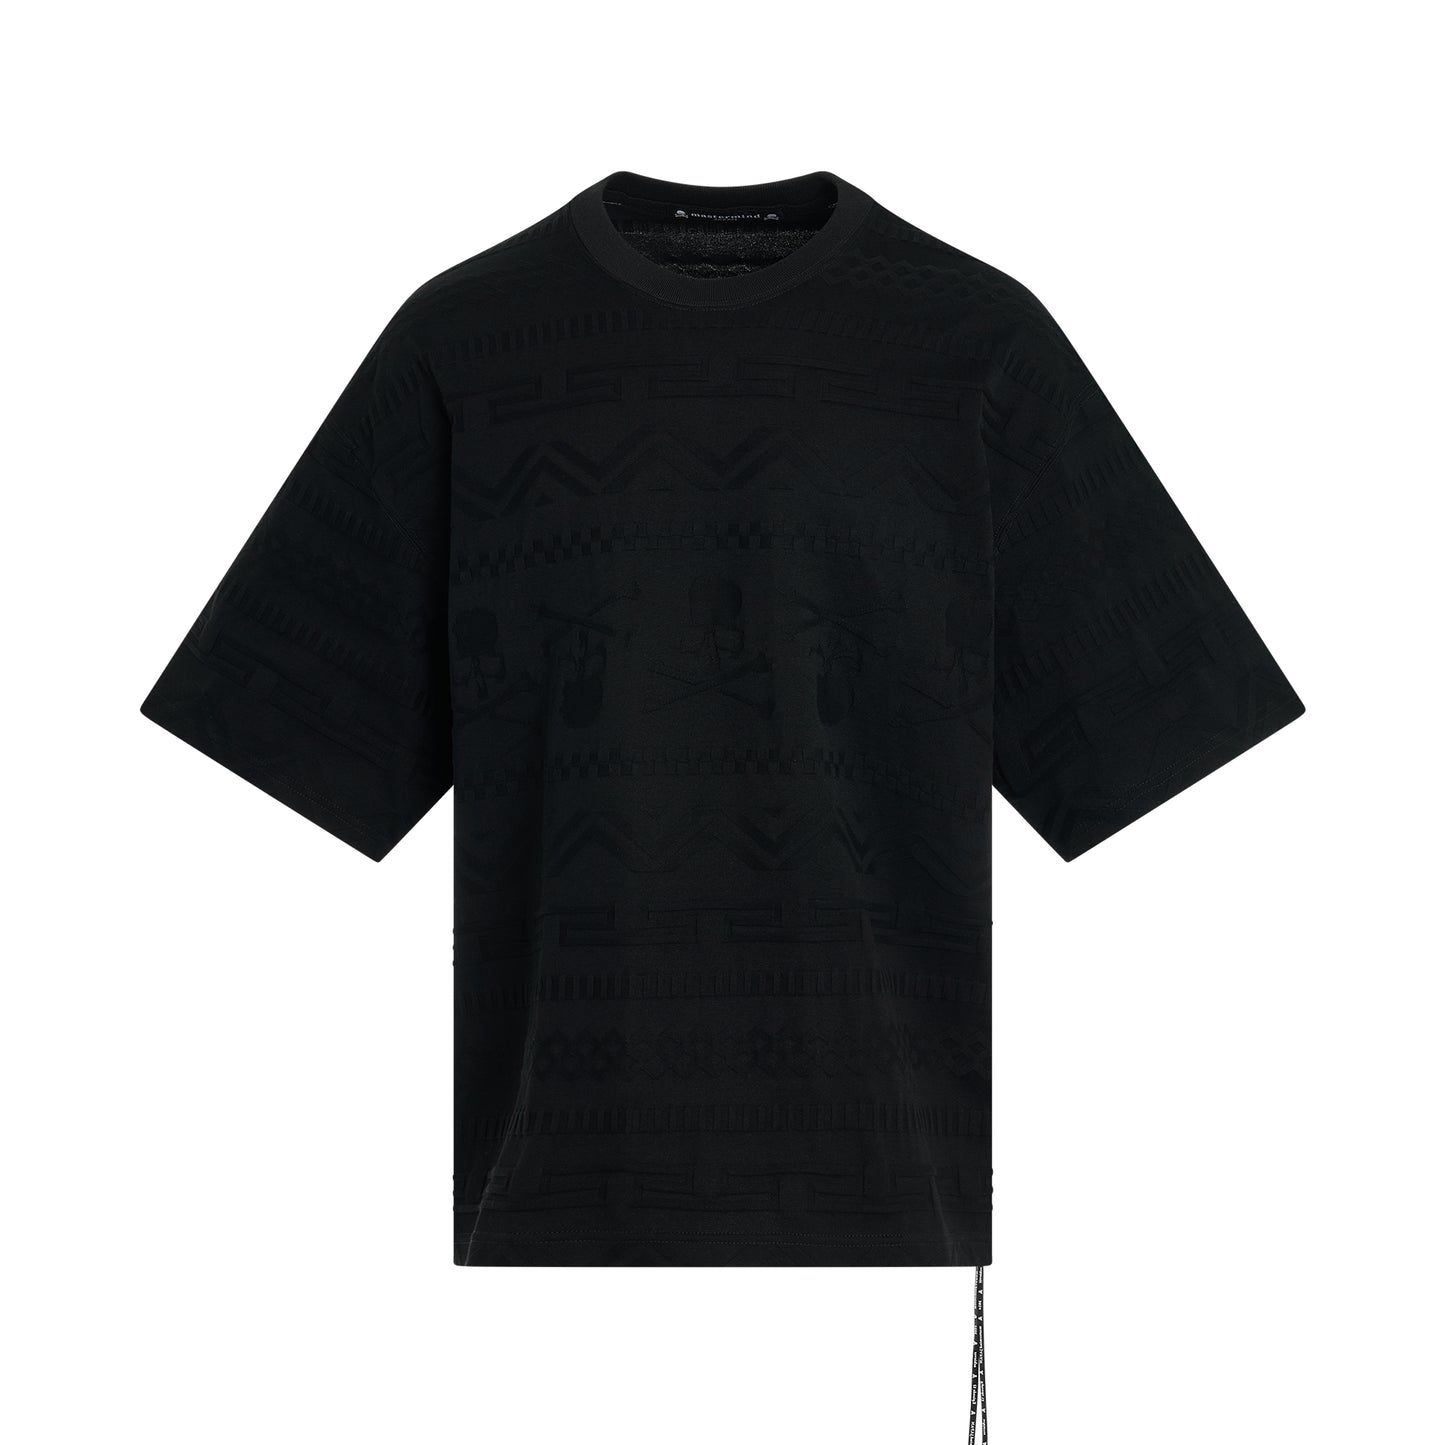 Links Jacquard Boxy Fit T-Shirt in Black